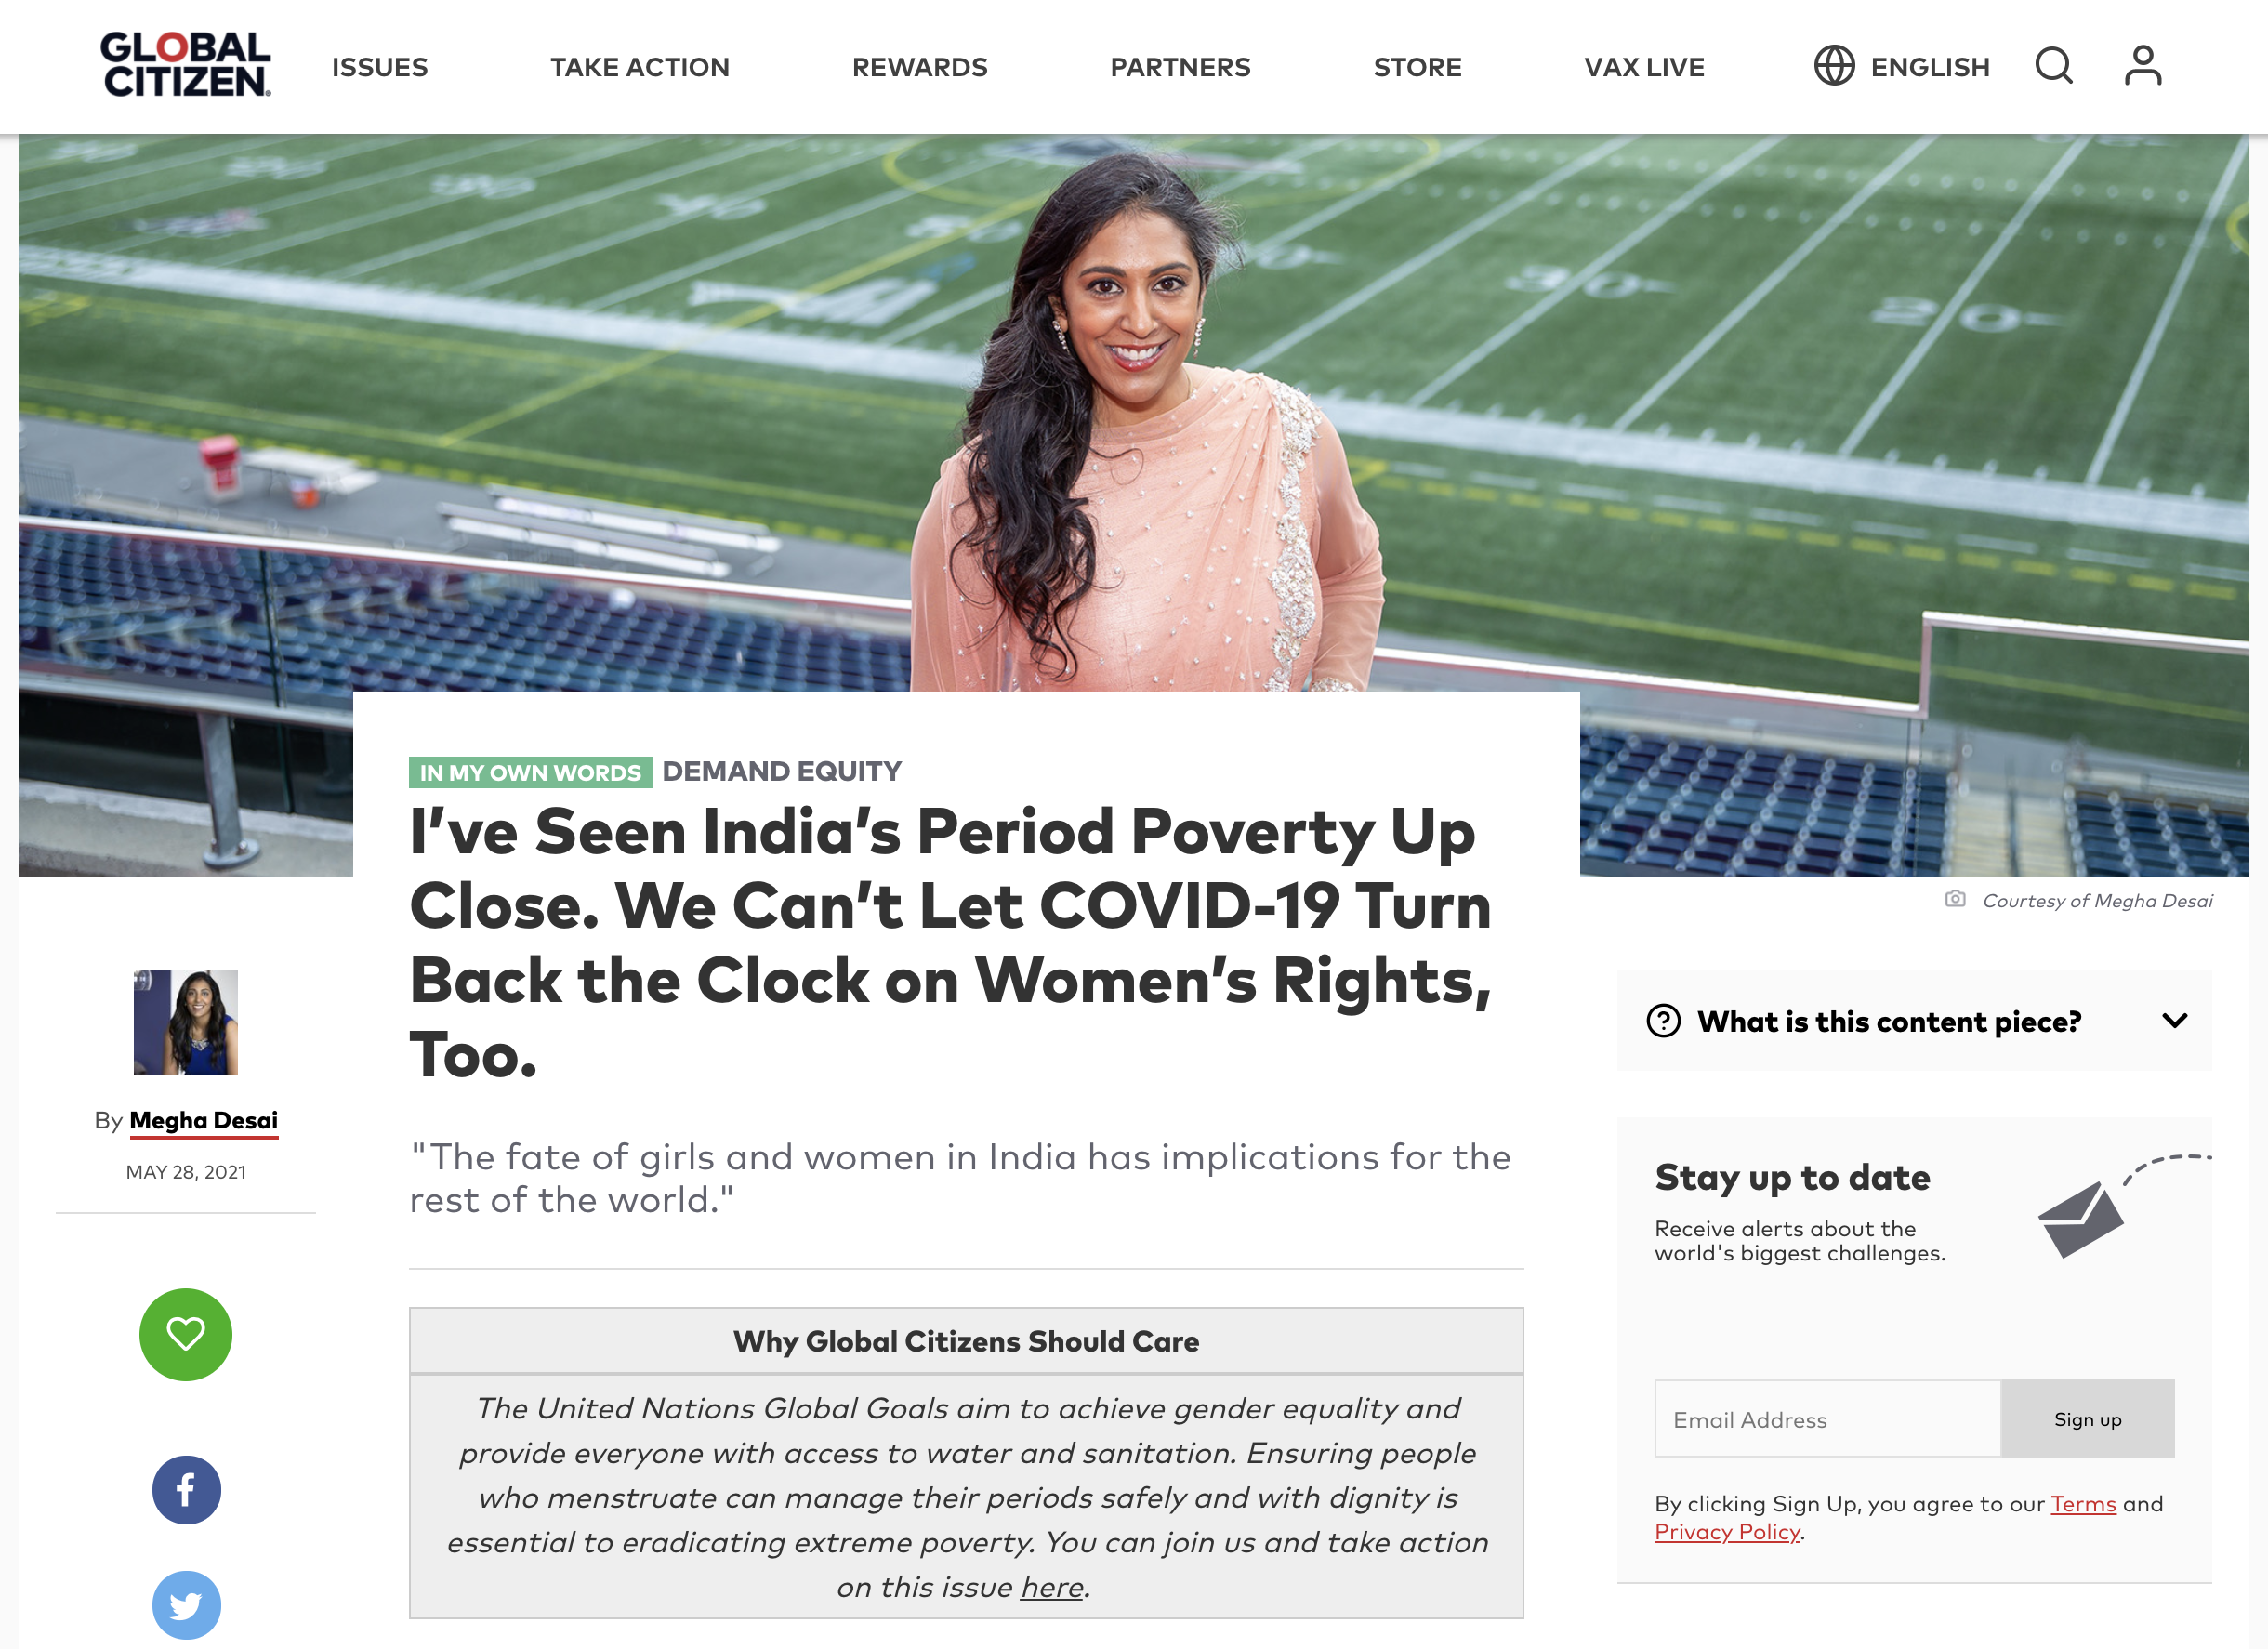 I’ve Seen India’s Period Poverty Up Close. We Can’t Let COVID-19 Turn Back the Clock on Women’s Rights, Too